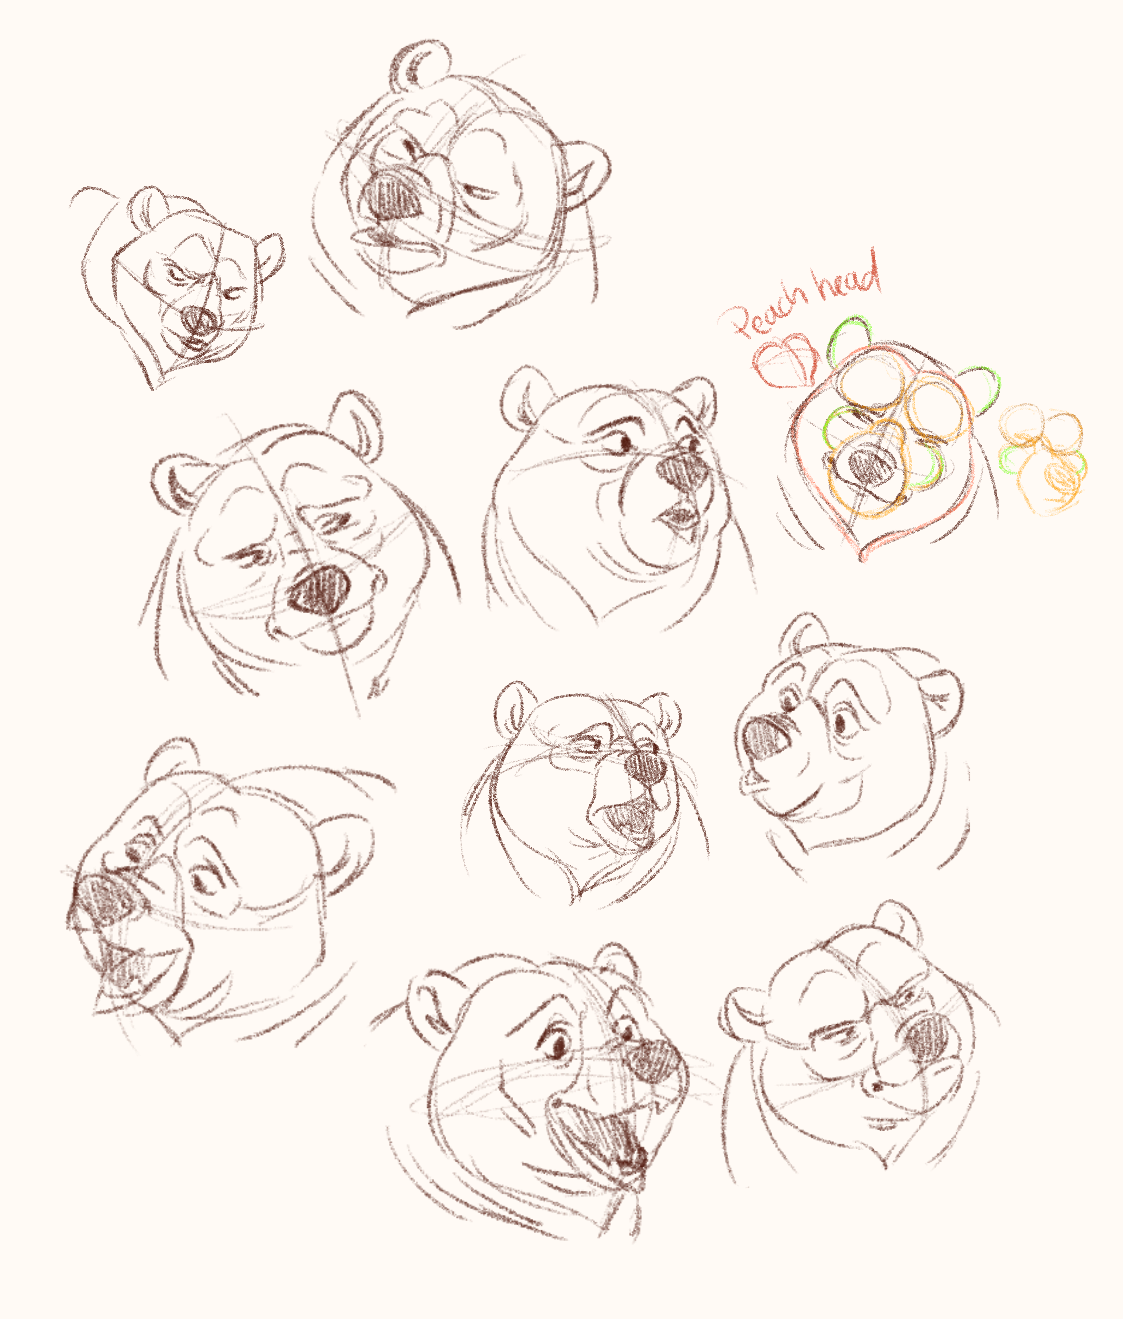 Disneys Brother Bear  I also did some practice sketching using direct